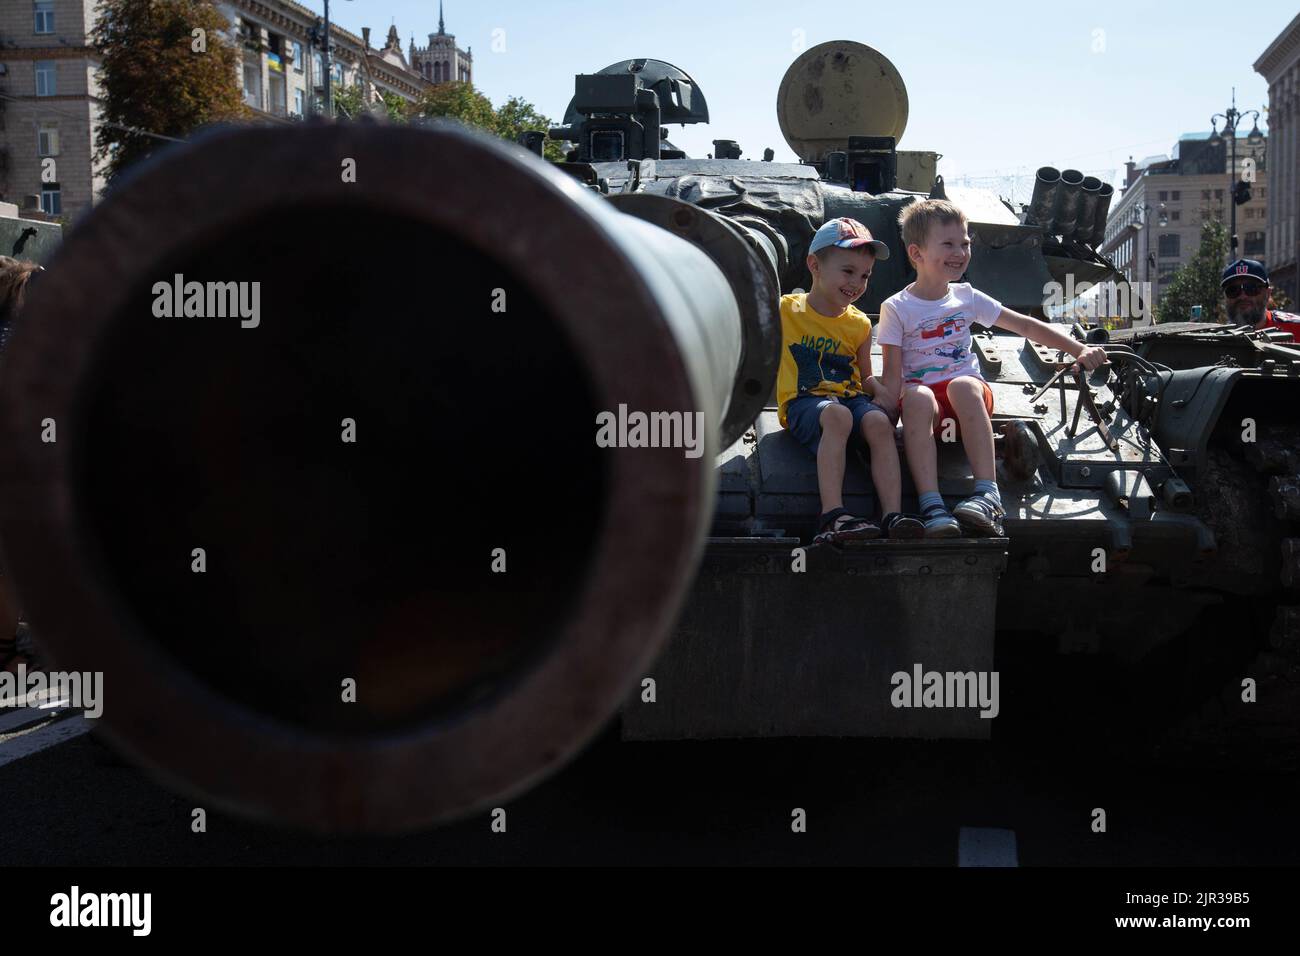 Children sit on a destroyed Russian tank displayed on the main street Khreshchatyk as part of the upcoming celebration of the Independence Day of Ukraine amid Russia's invasion of Ukraine in central Kyiv. Stock Photo